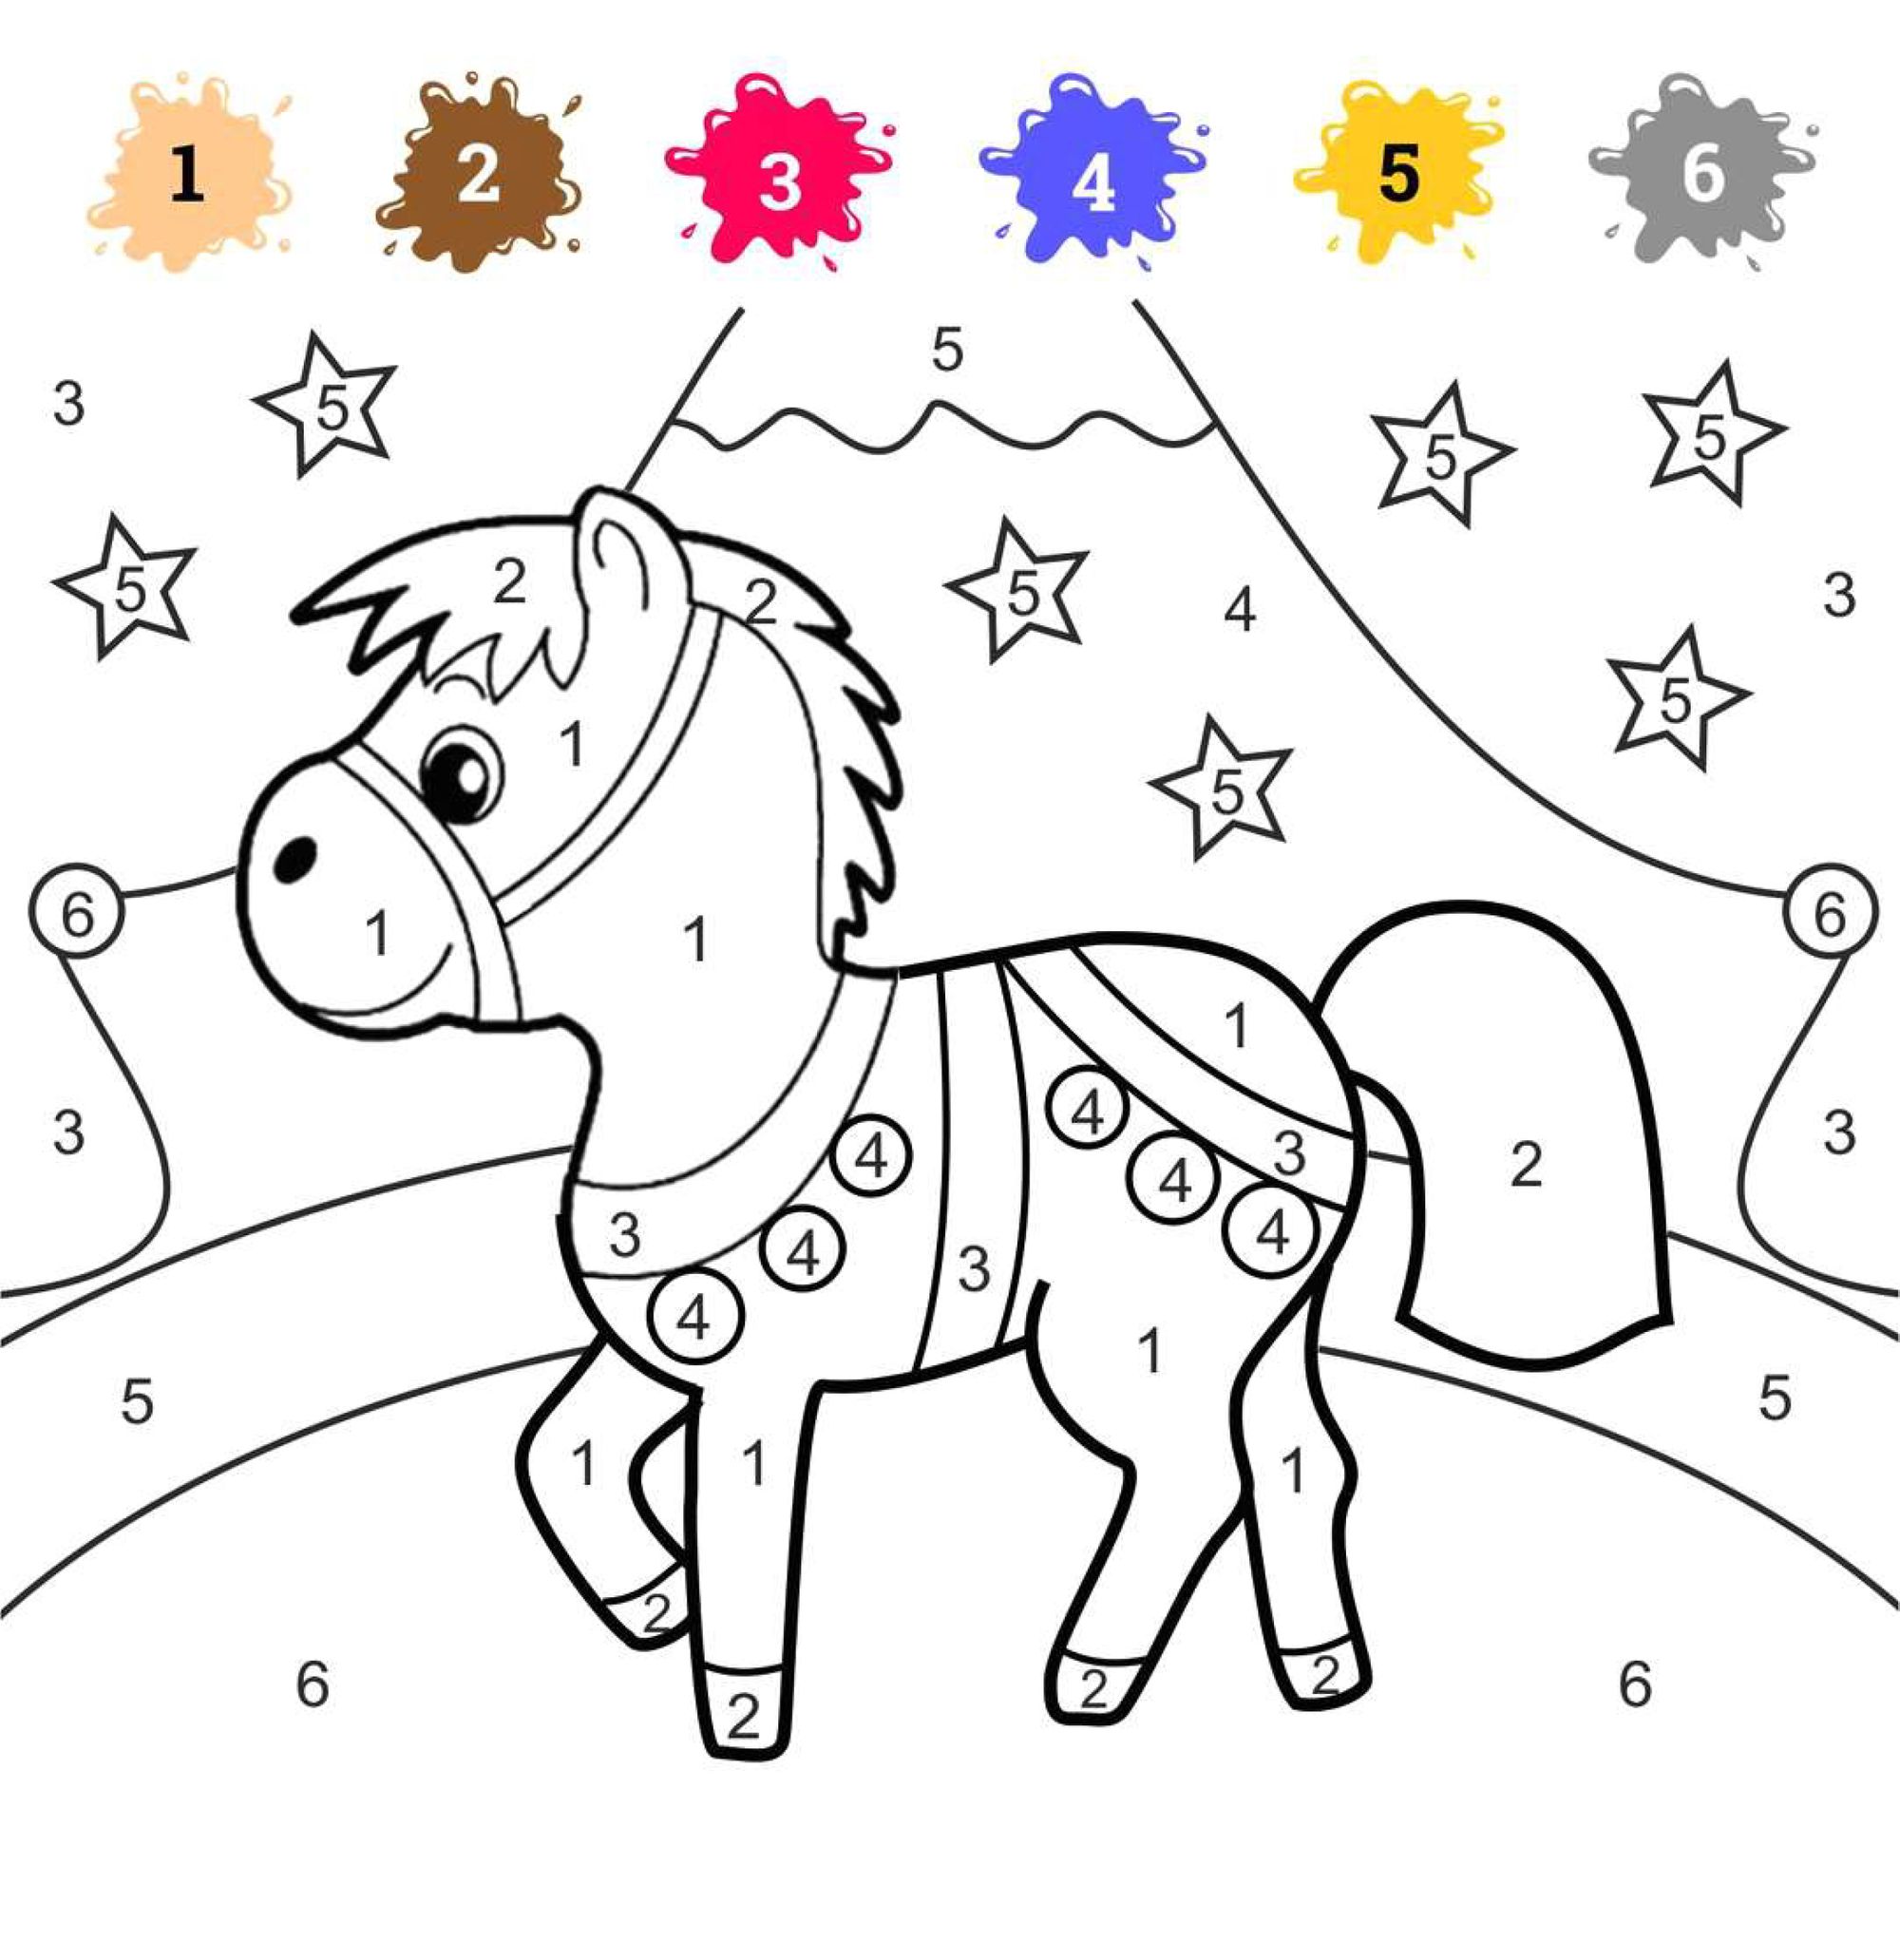 coloring-by-numbers-for-children